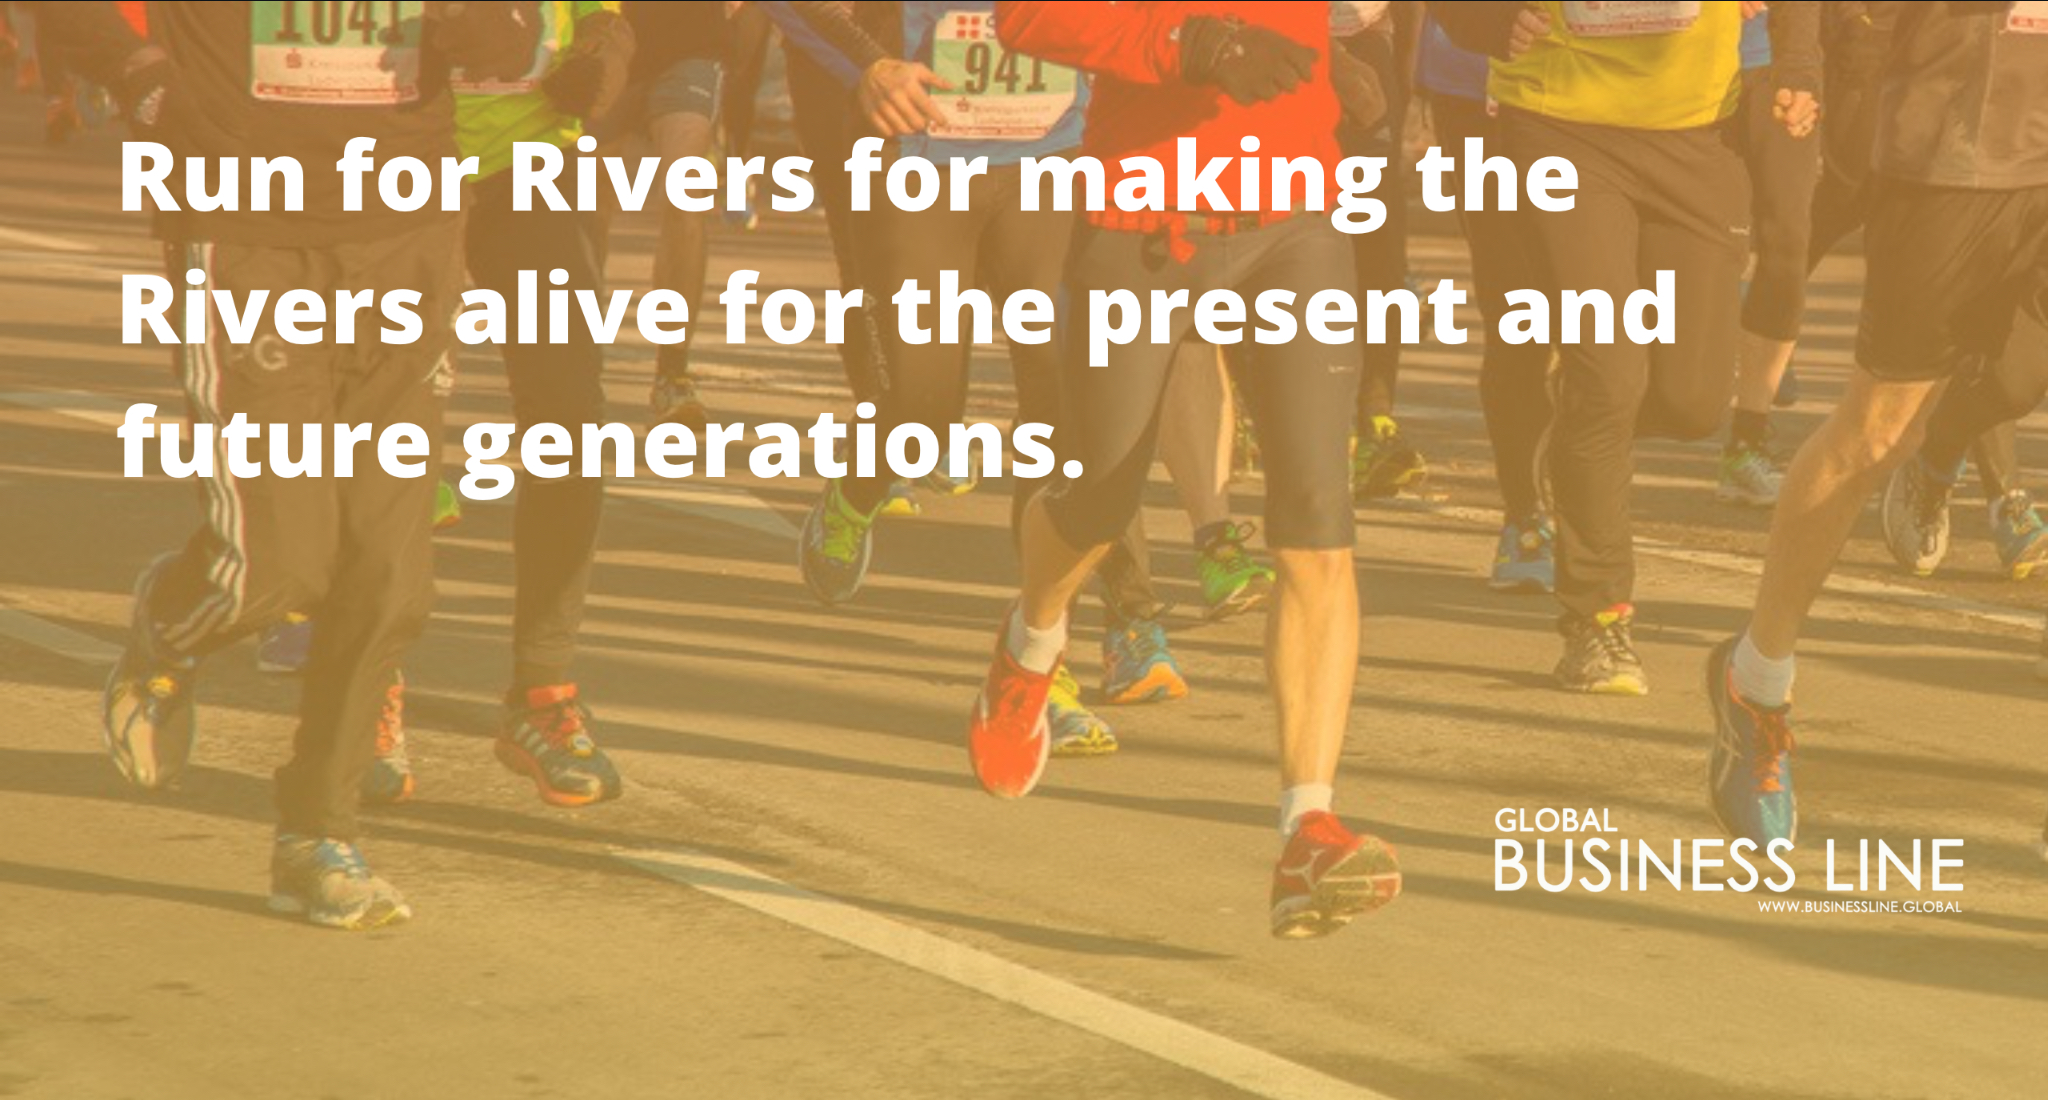 Run for Rivers for making the Rivers alive for the present and future generations.